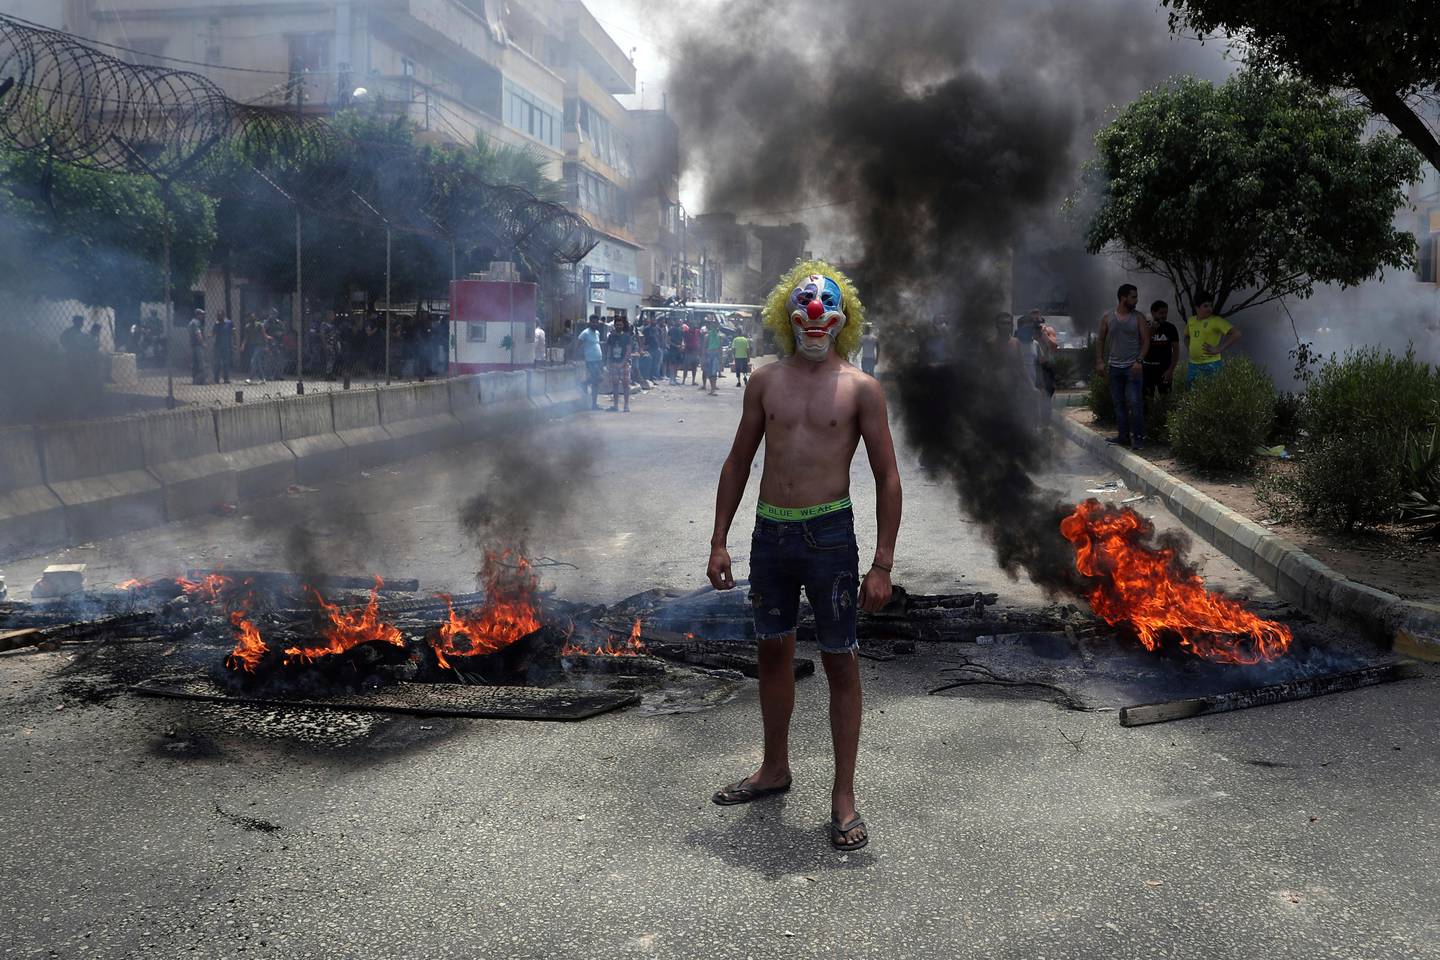 An anti-government demonstrator poses with a clown mask as others burn tires and wood to block a road in Beirut, Lebanon, Tuesday, July 14, 2020. Trash has been piling up in different parts of Lebanon recently as no deal has been reached between the government and waste management companies over payments for their employees. Most workers at the companies are foreigners and want to get paid in U.S. dollars. Lebanon is witnessing shortage in hard currency and the Lebanese pound has lost more than 80% of its value in recent months. (AP Photo/Bilal Hussein)